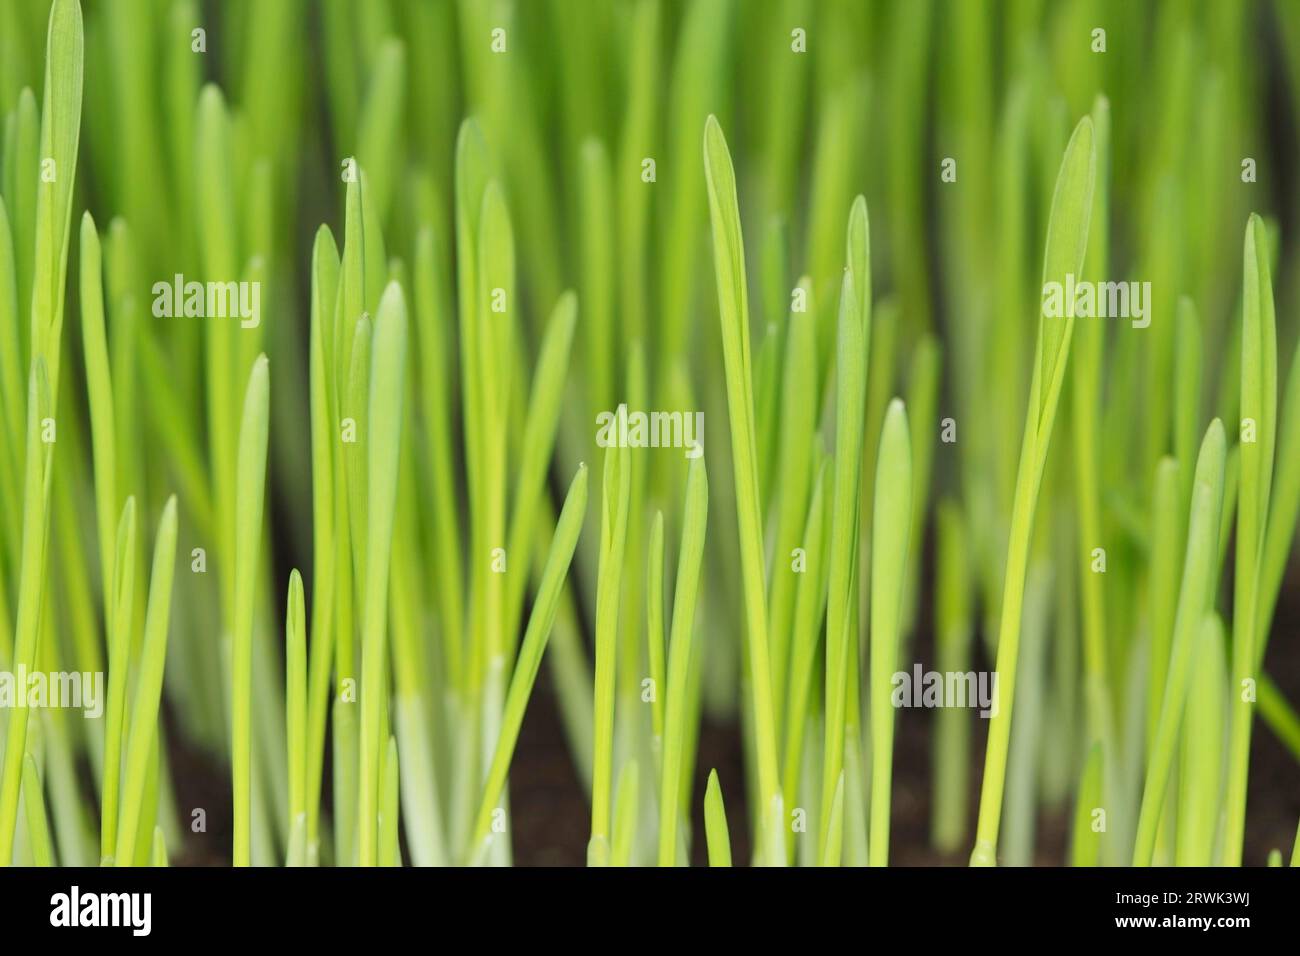 Barley seedlings photographed with ring flash. Short depth of field Stock Photo